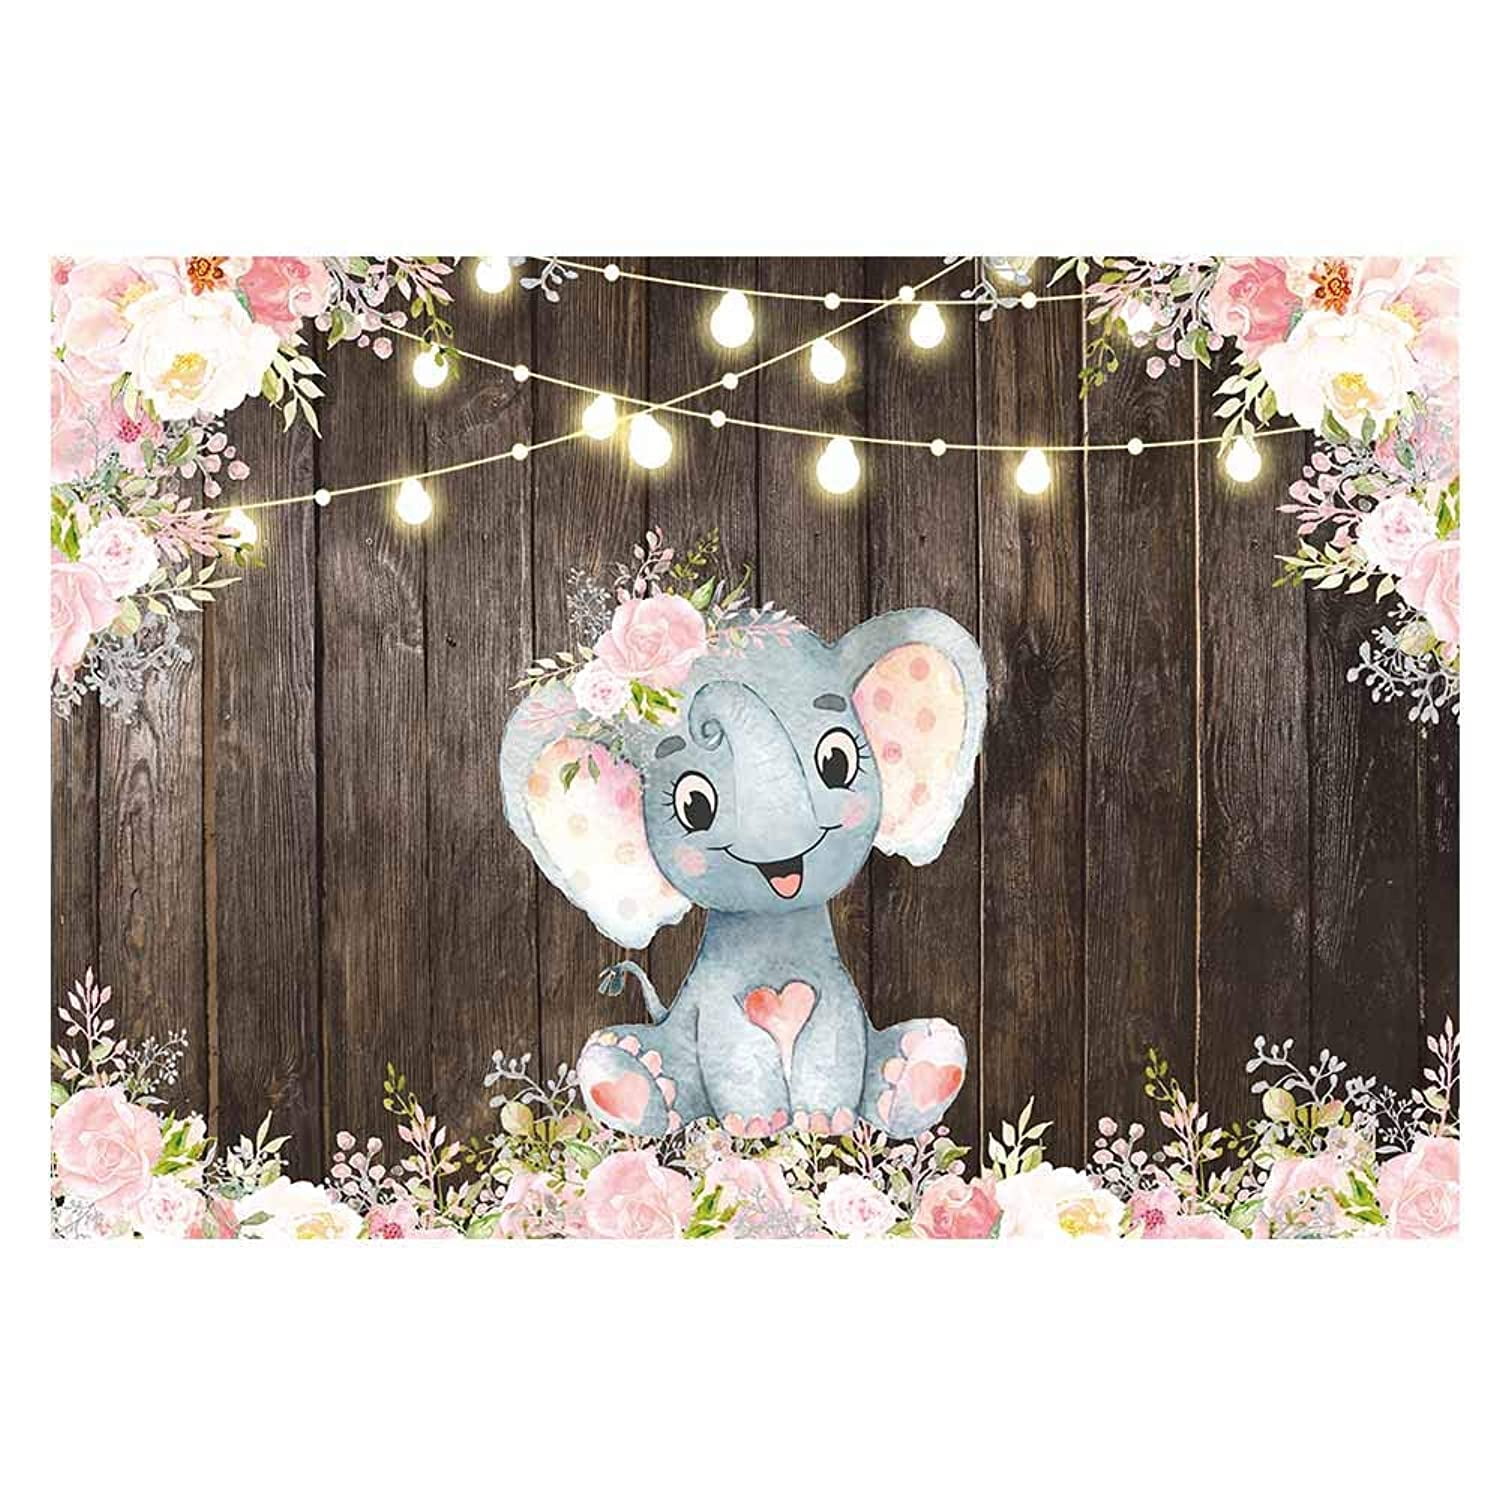 Cute Pink Elephant Backdrops 5x3ft Vinyl Photography Background Wooden Texture Wall with Pink Flowers Baby Shower Girls Baby Birthday Party Decoration Backdrops 